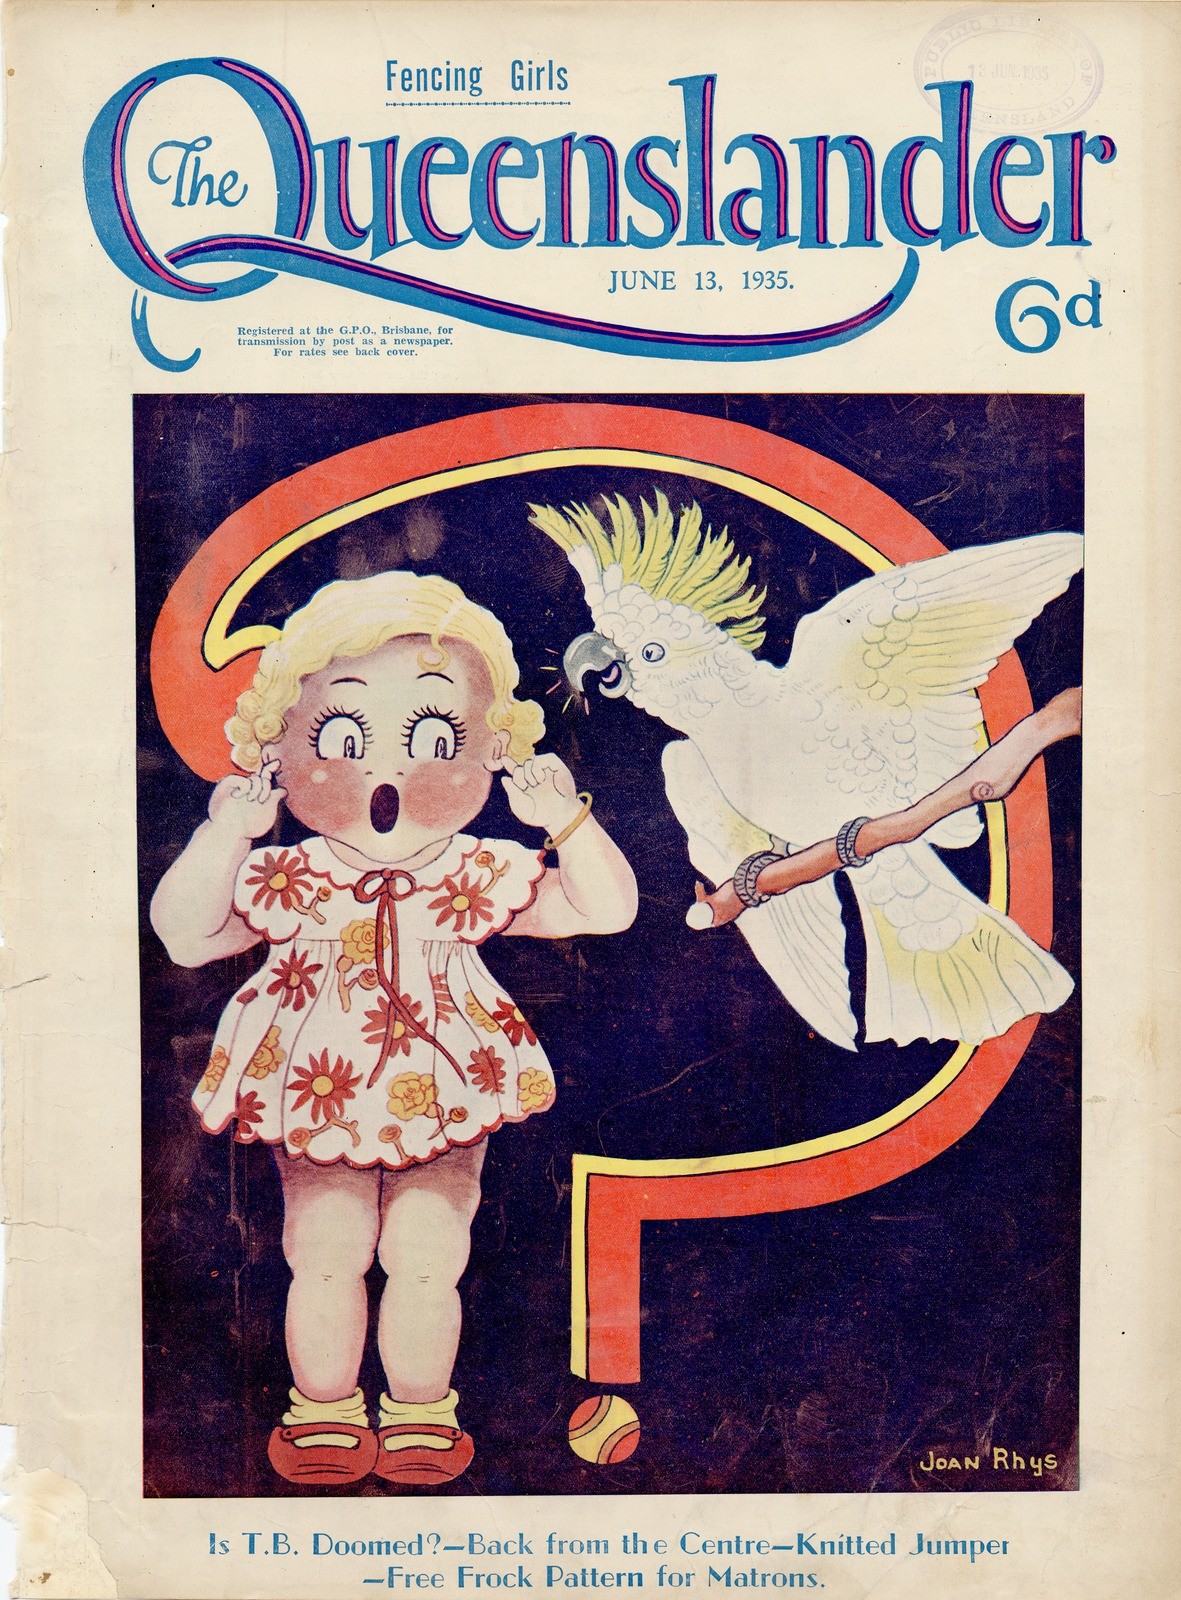 Illustrated front cover from The Queenslander June 13 1935 Joan Rhys State Library of Queensland 